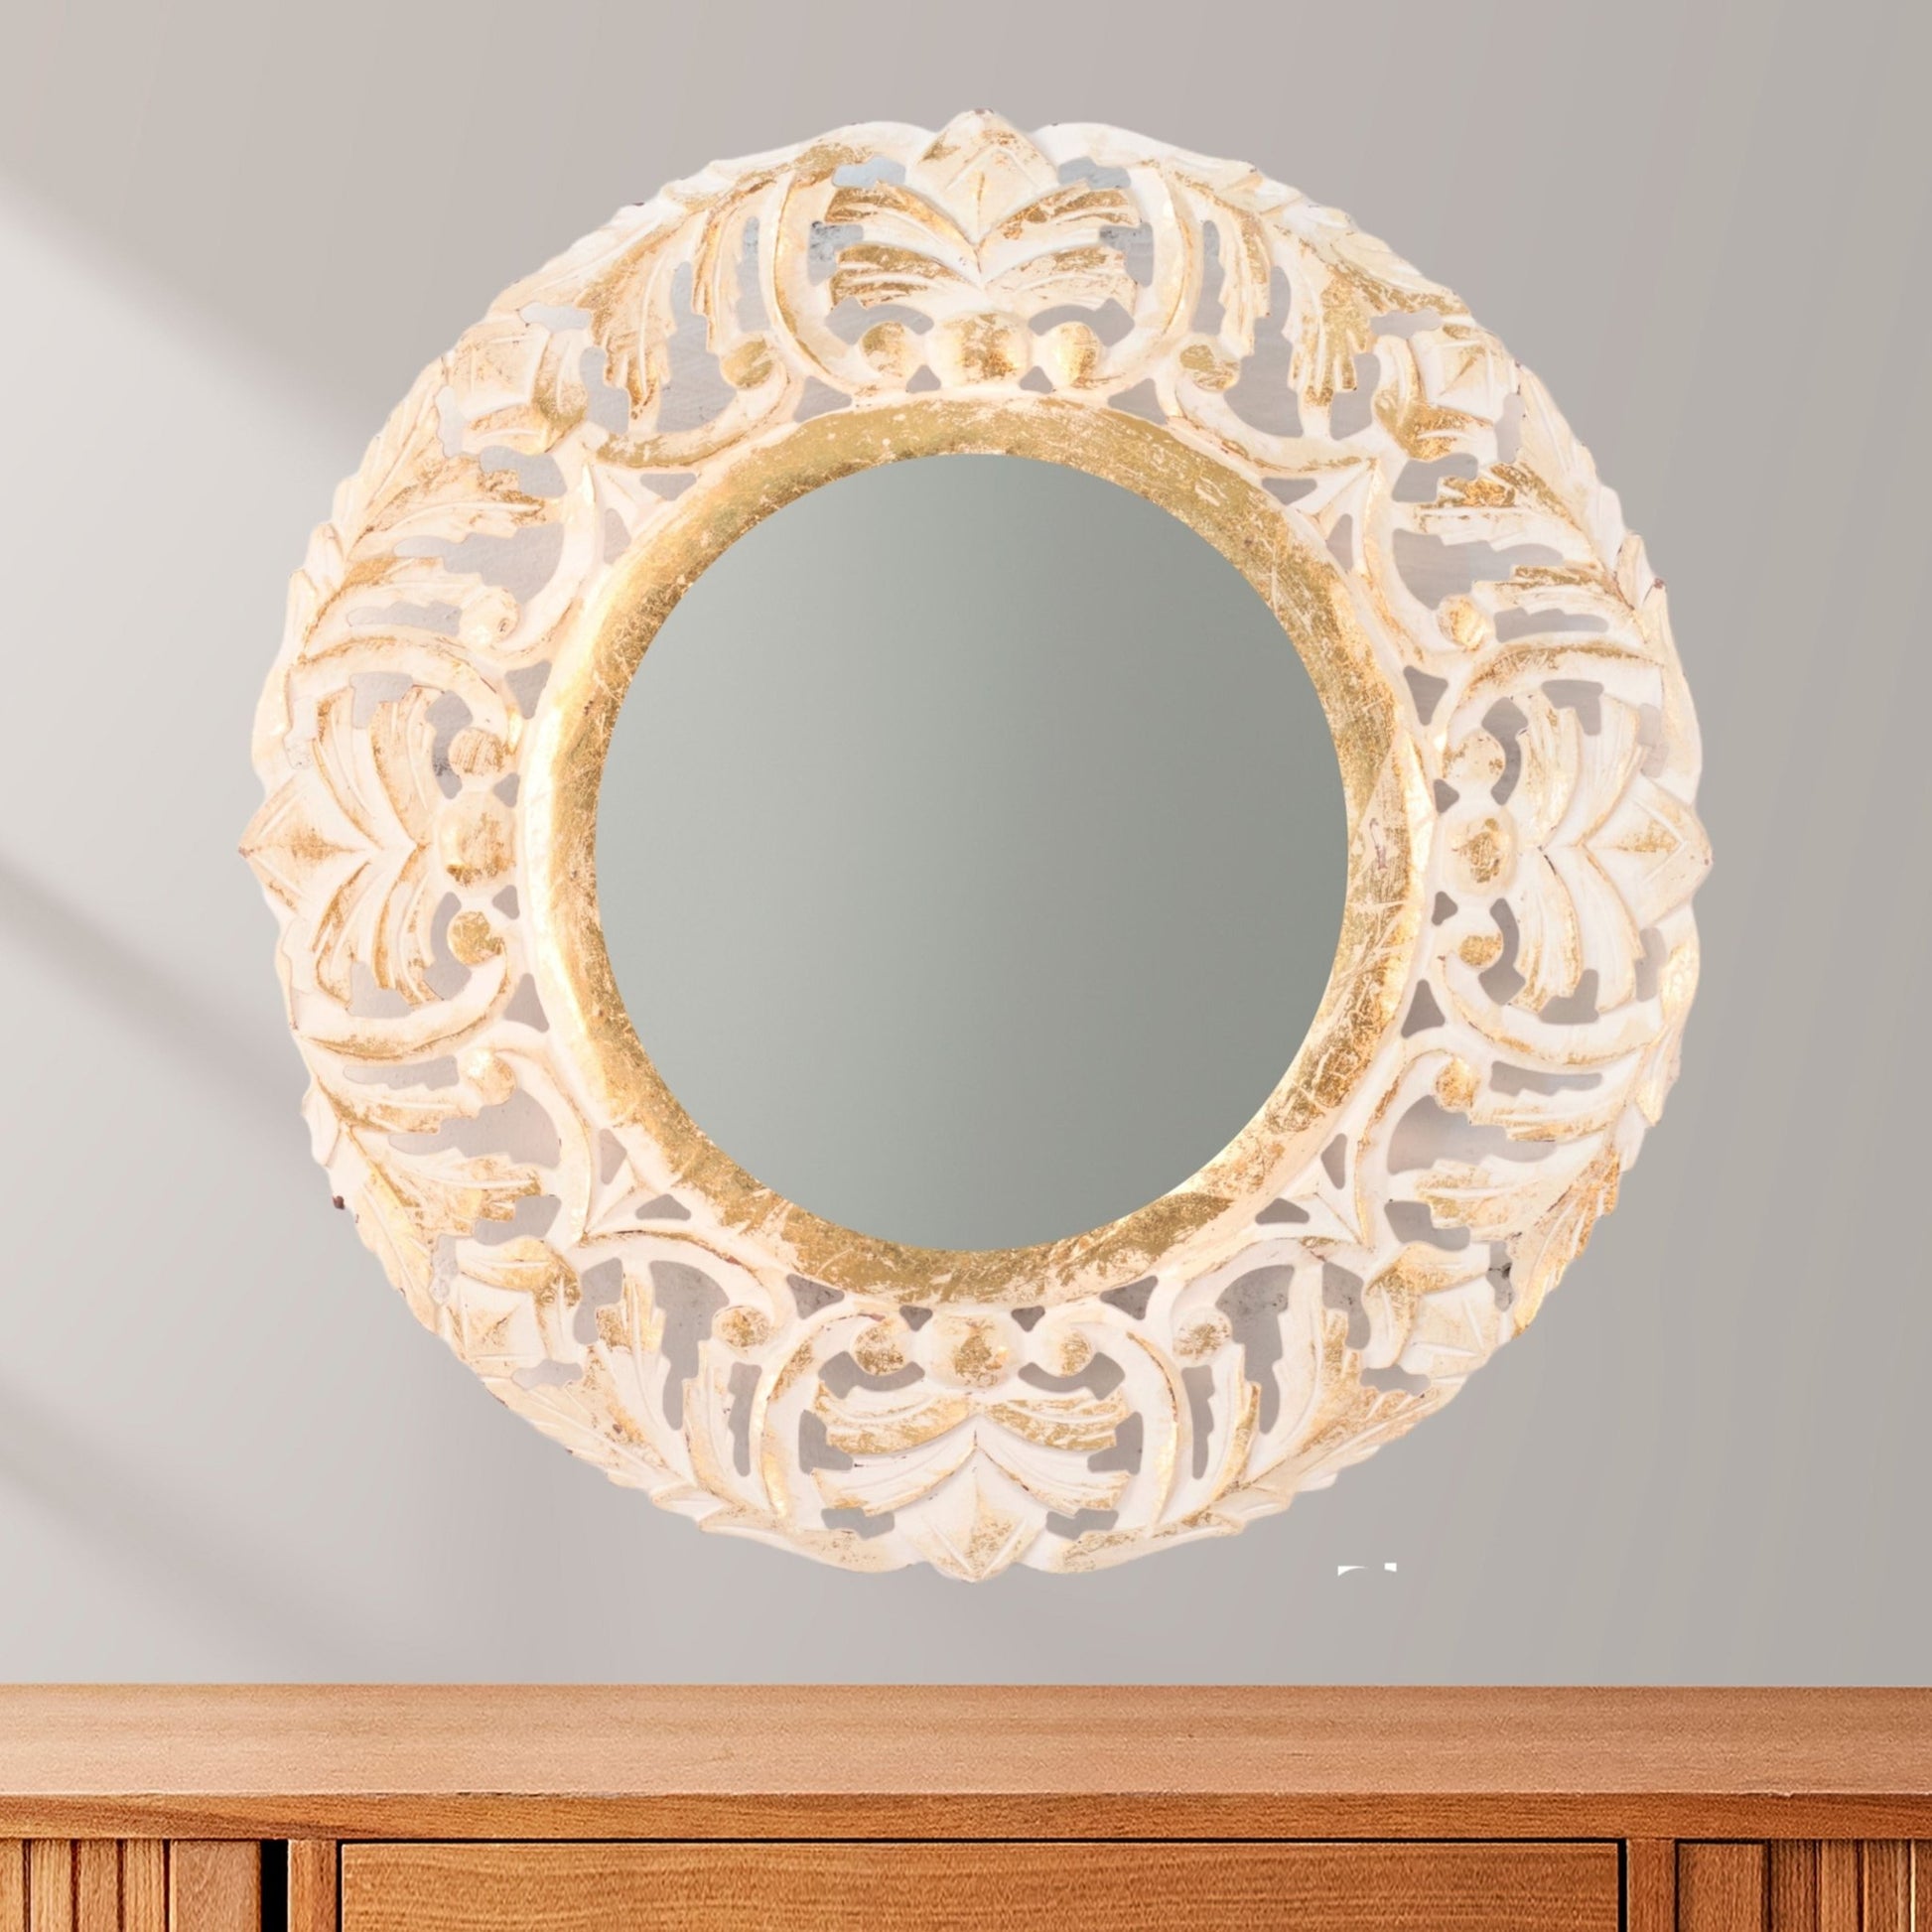 Kezevel Wooden Wall Hanging Mirror - Handcarved Round Golden White Decorative Mirrors, Mirror for Wall Decoration